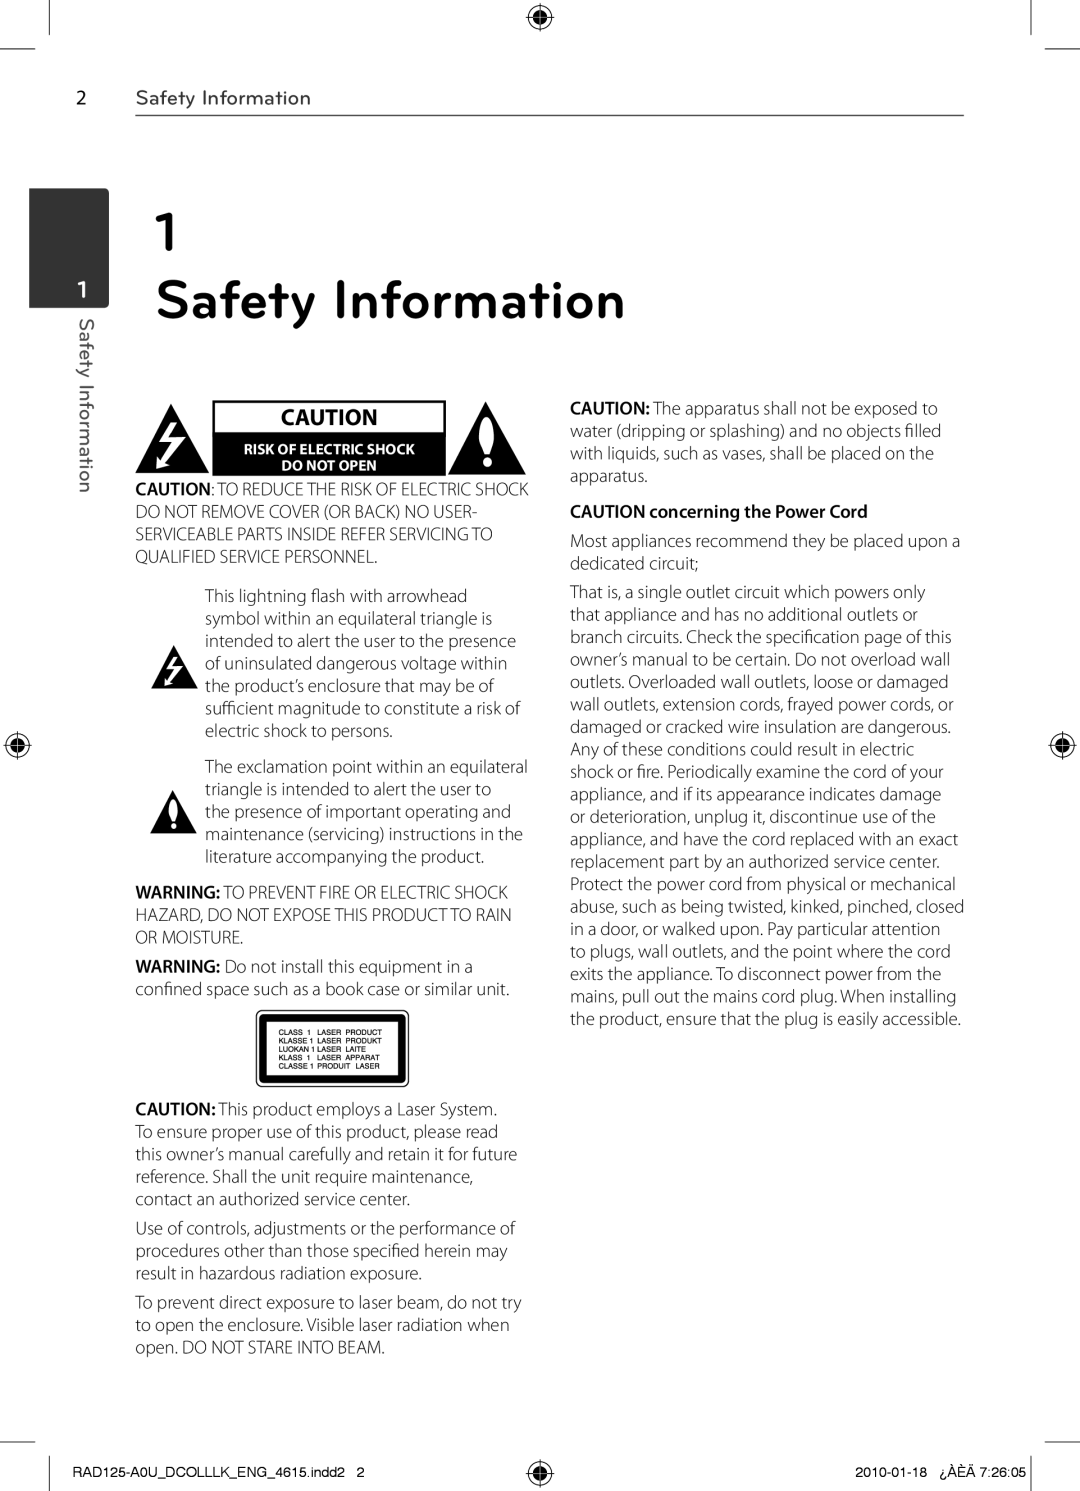 LG Electronics RAD125, MFL63284615, RAS125F owner manual Safety Information, CAUTION concerning the Power Cord 